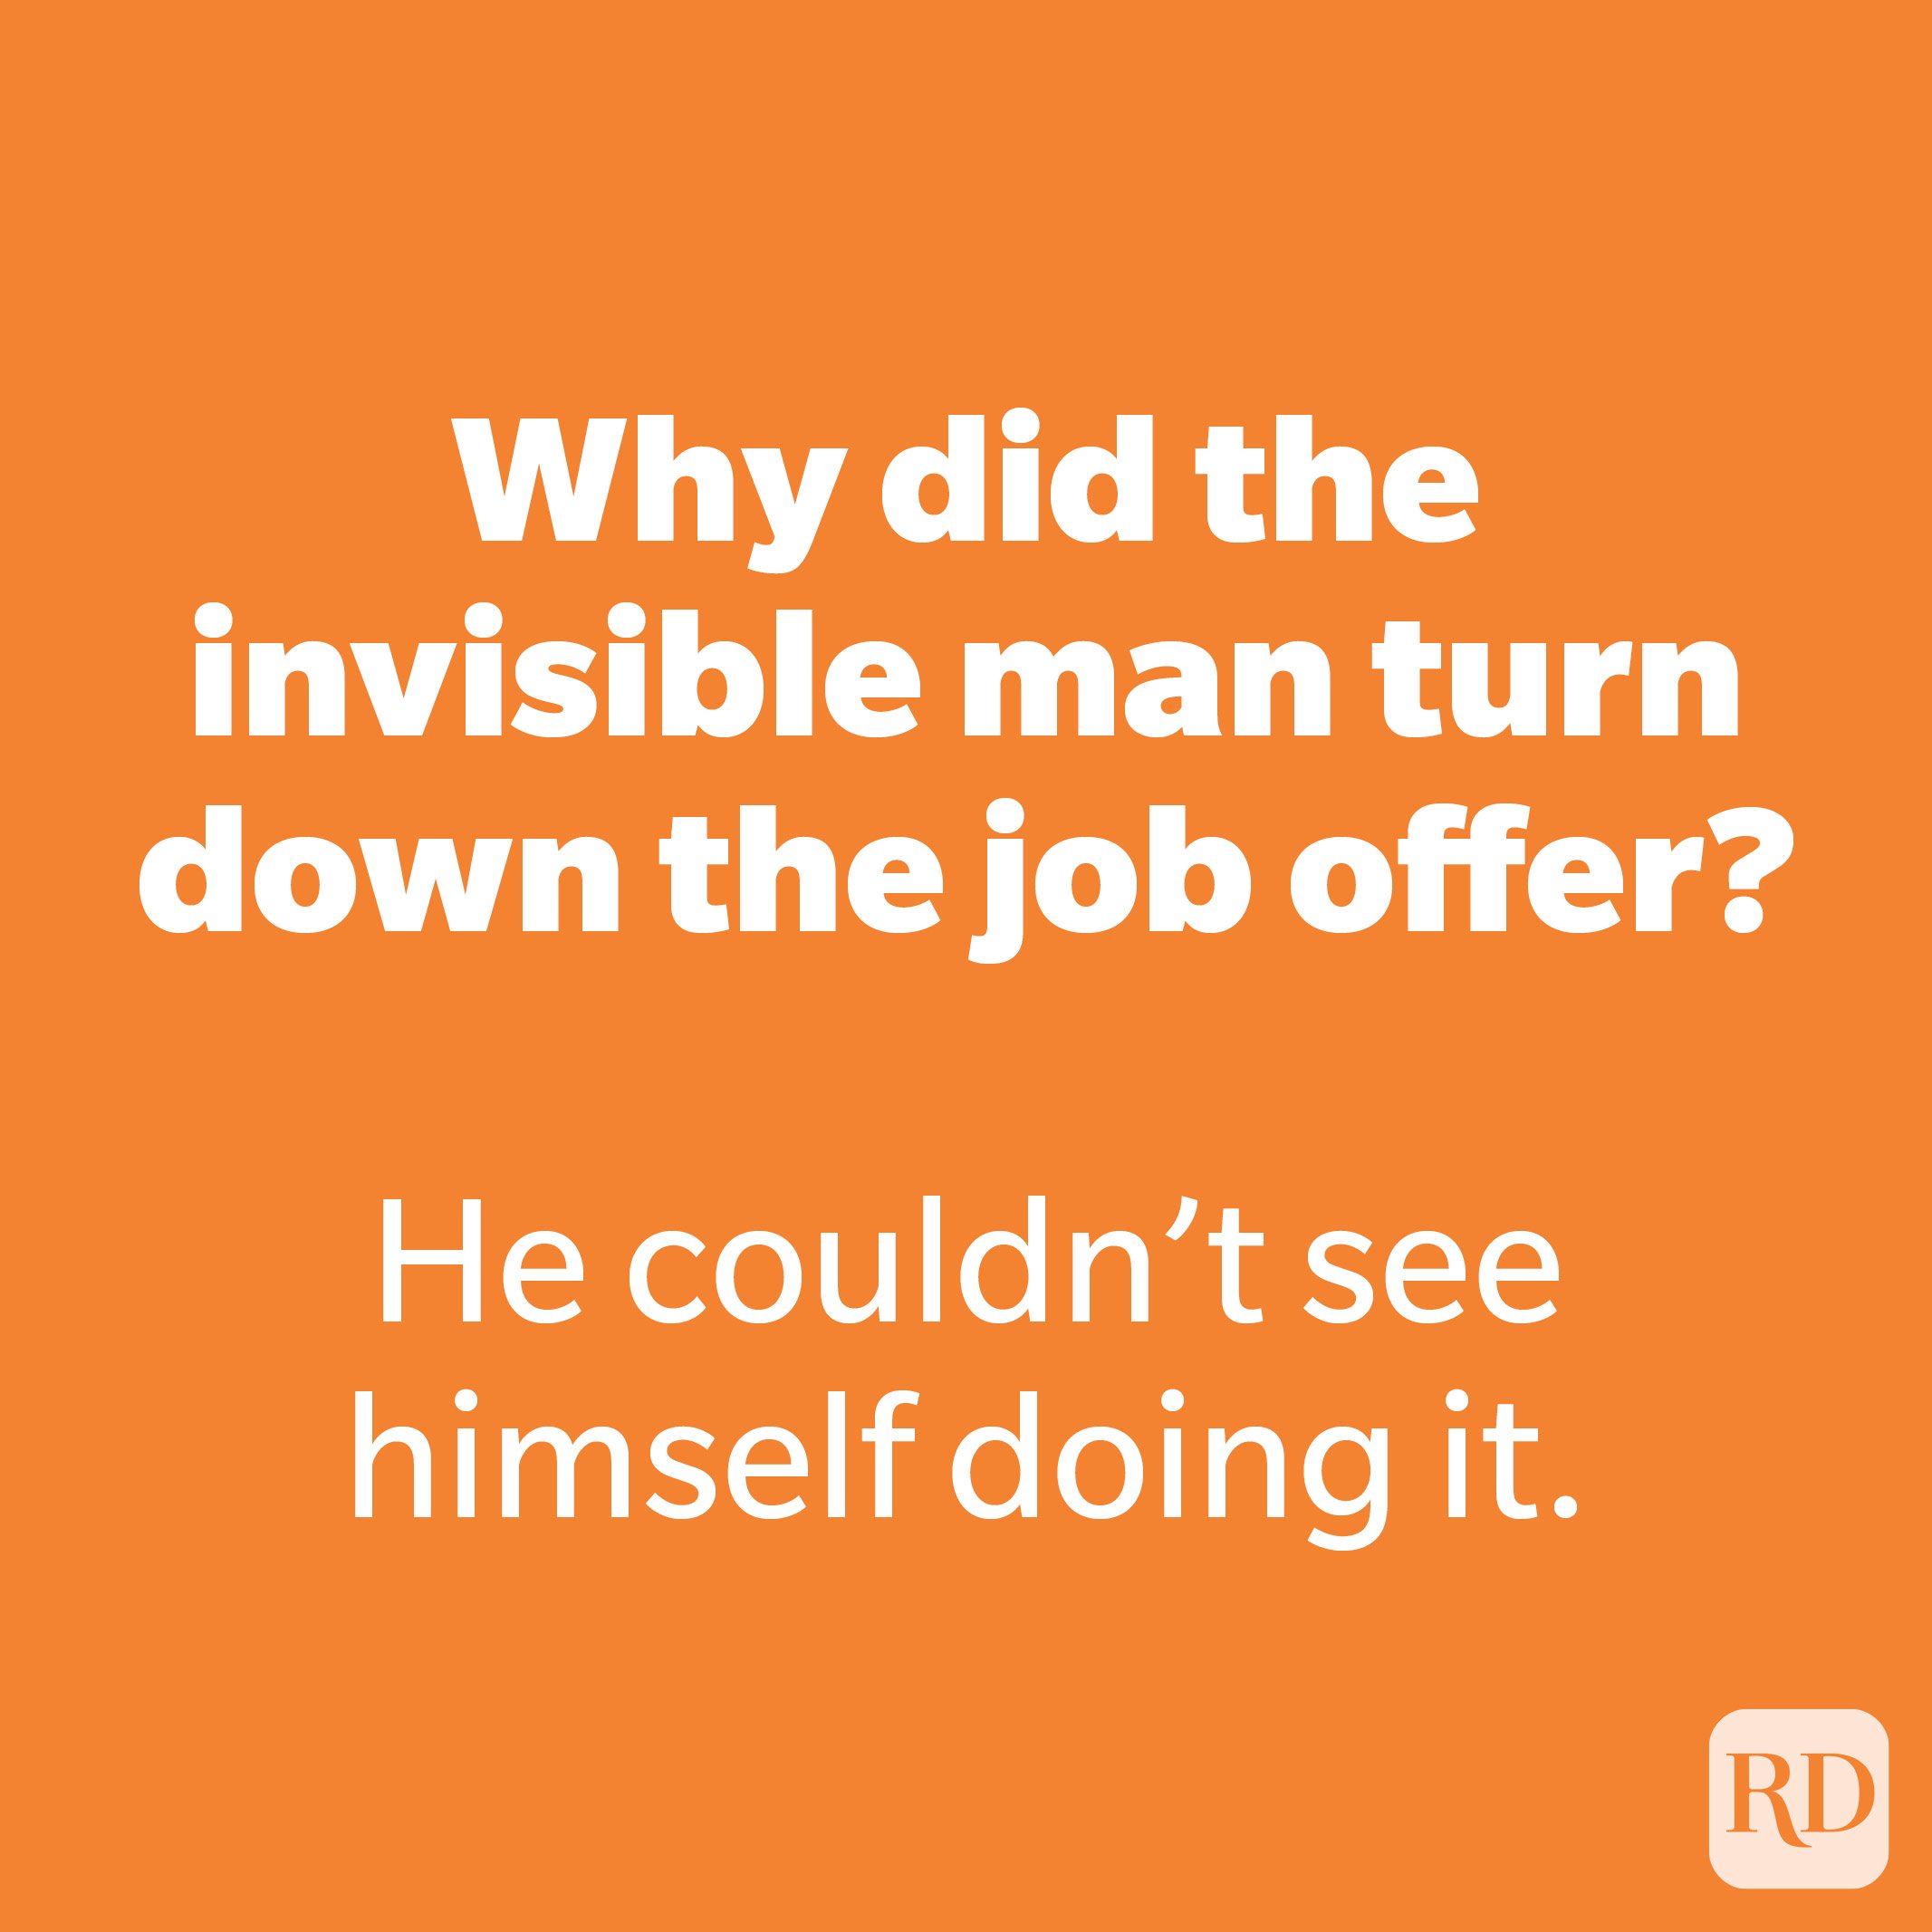 Why did the invisible man turn down the job offer?